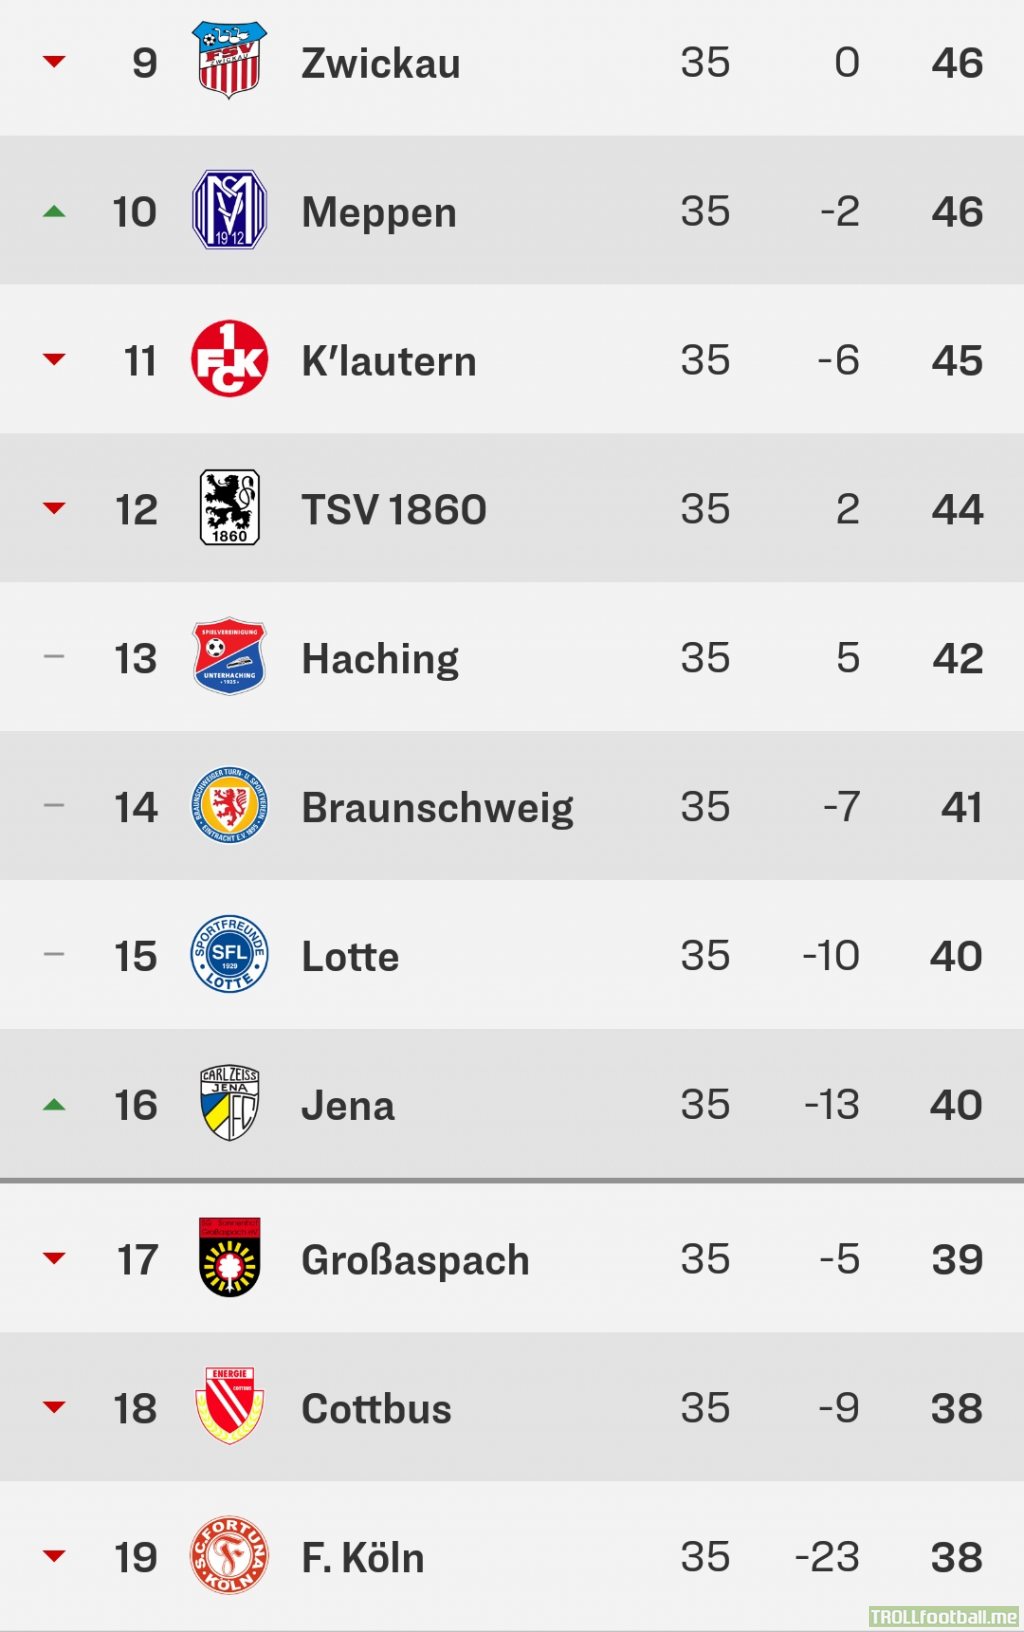 With three games to go, half the league is still stuck in the relegation battle of Germany's 3. Liga.